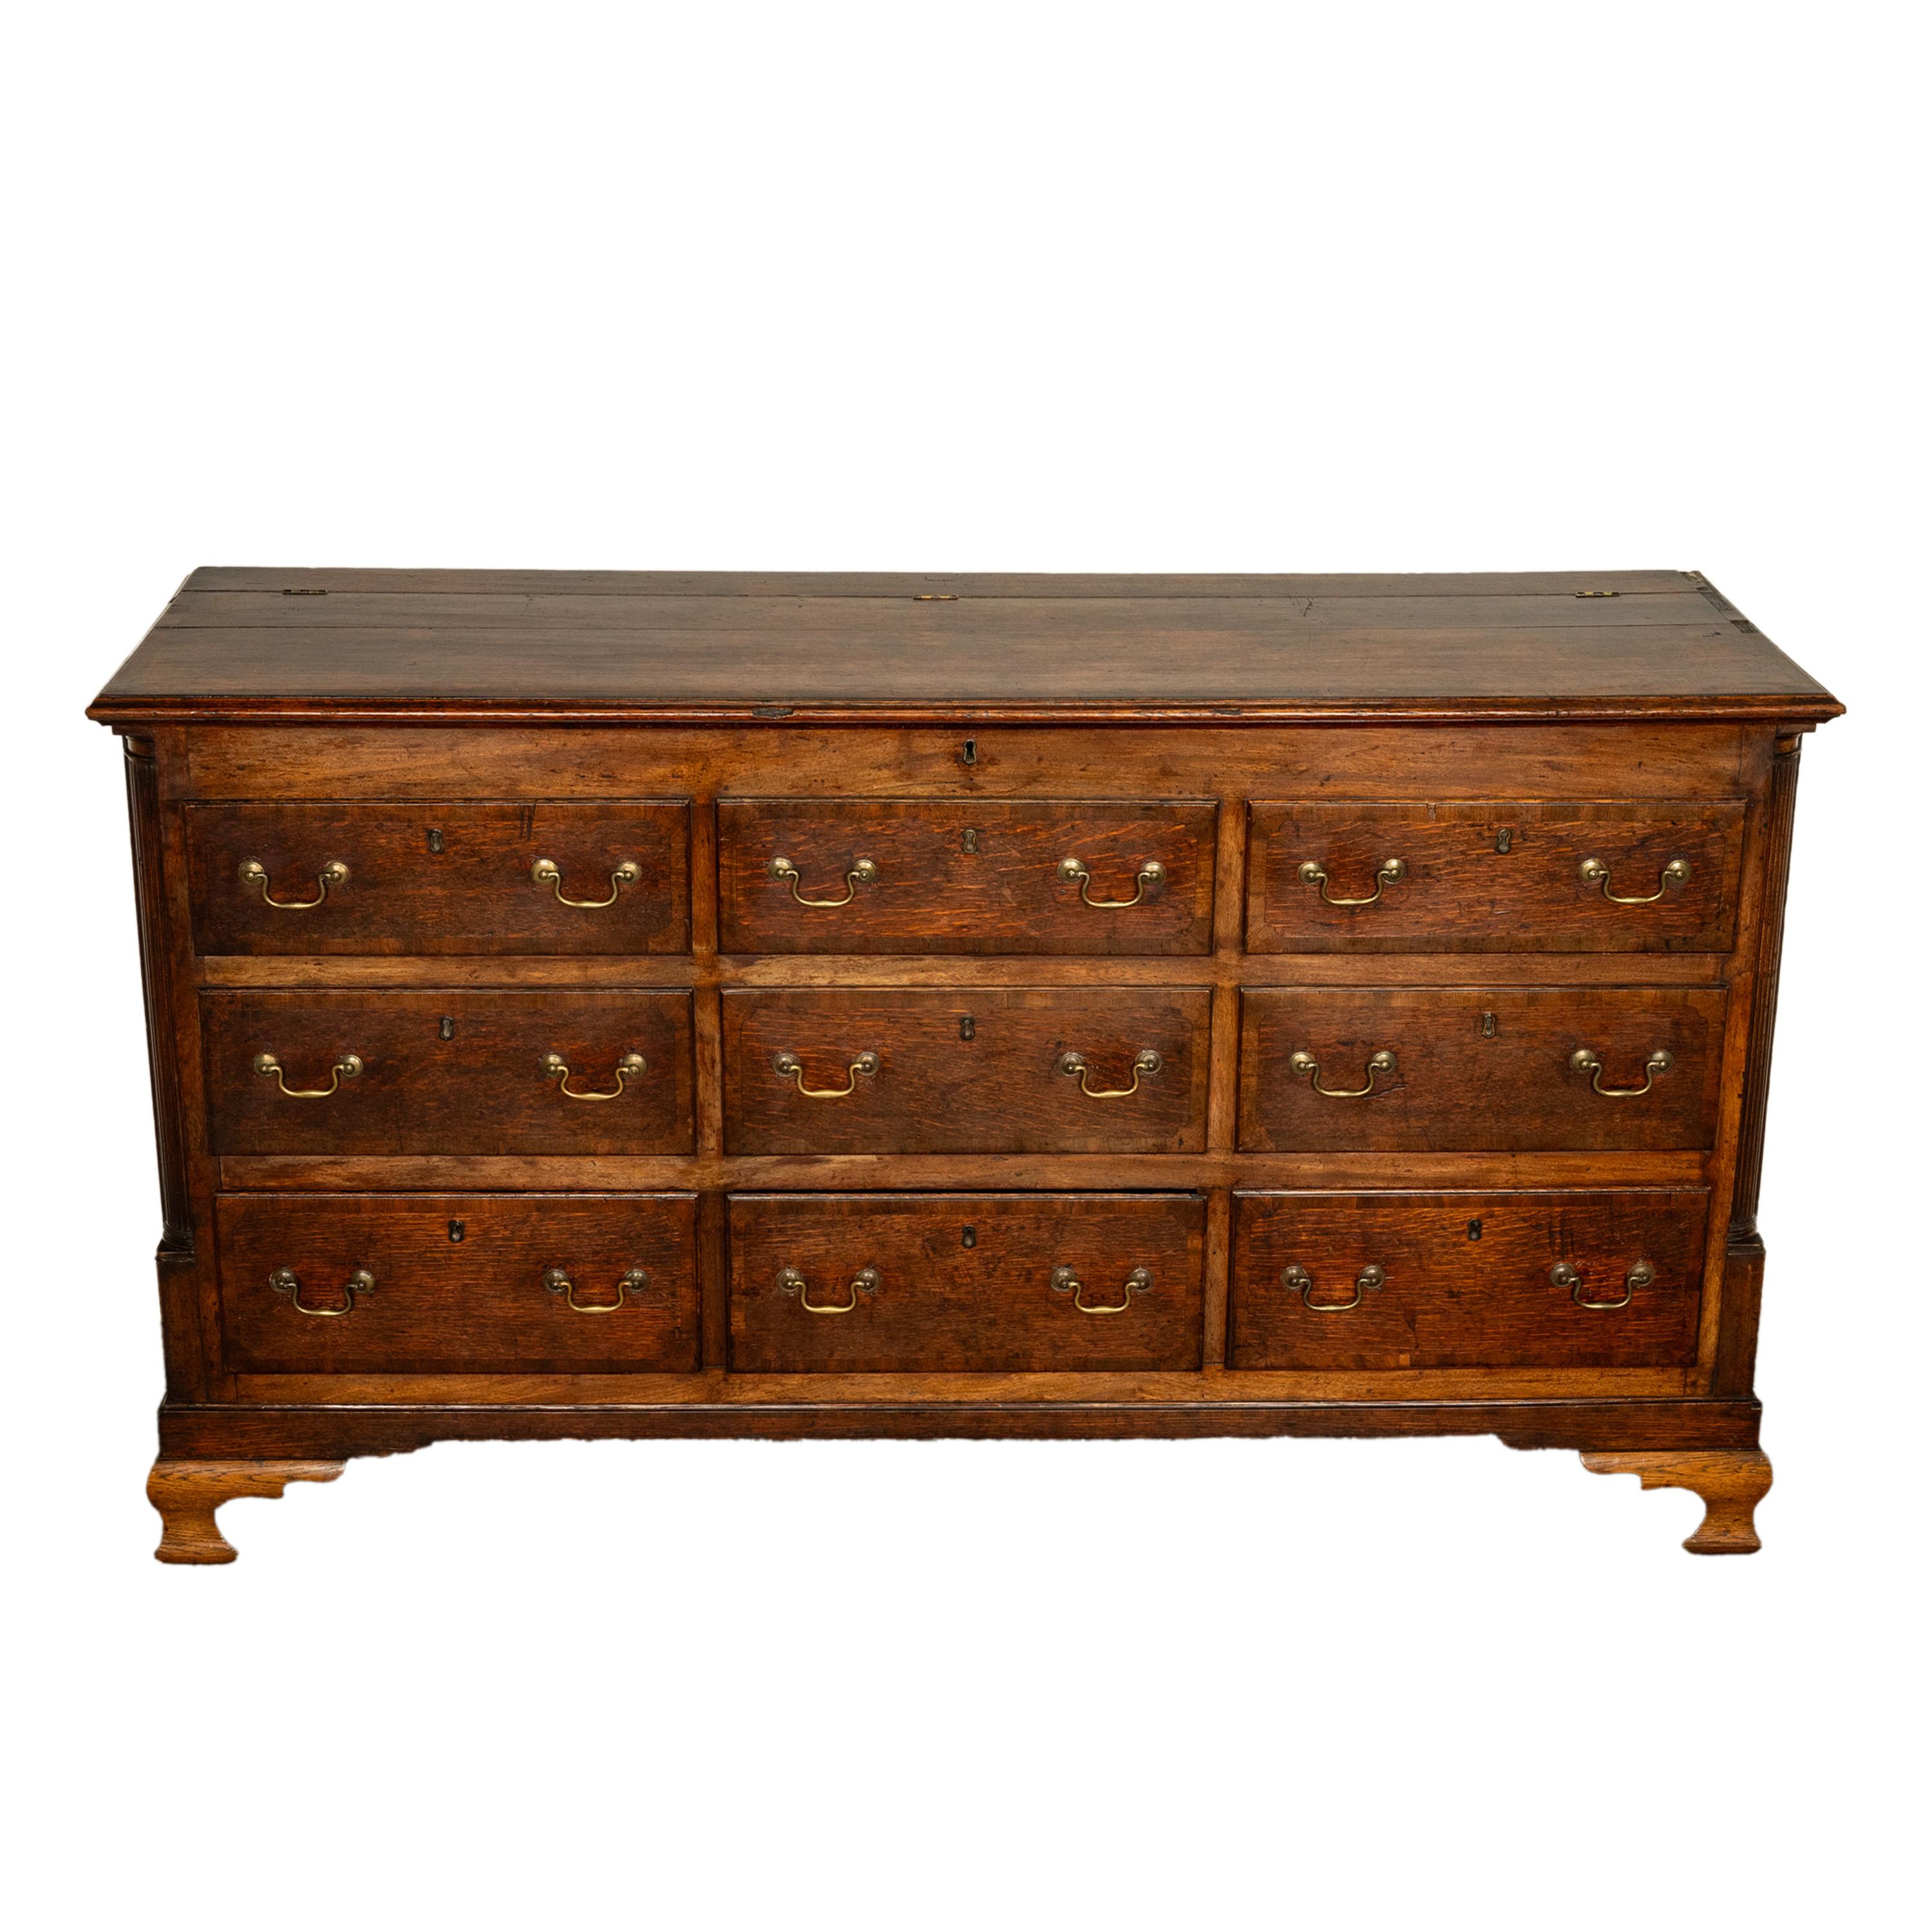 English Antique 18th C Georgian Oak Mahogany Hinged Top Mule Chest Coffer Sideboard 1770 For Sale